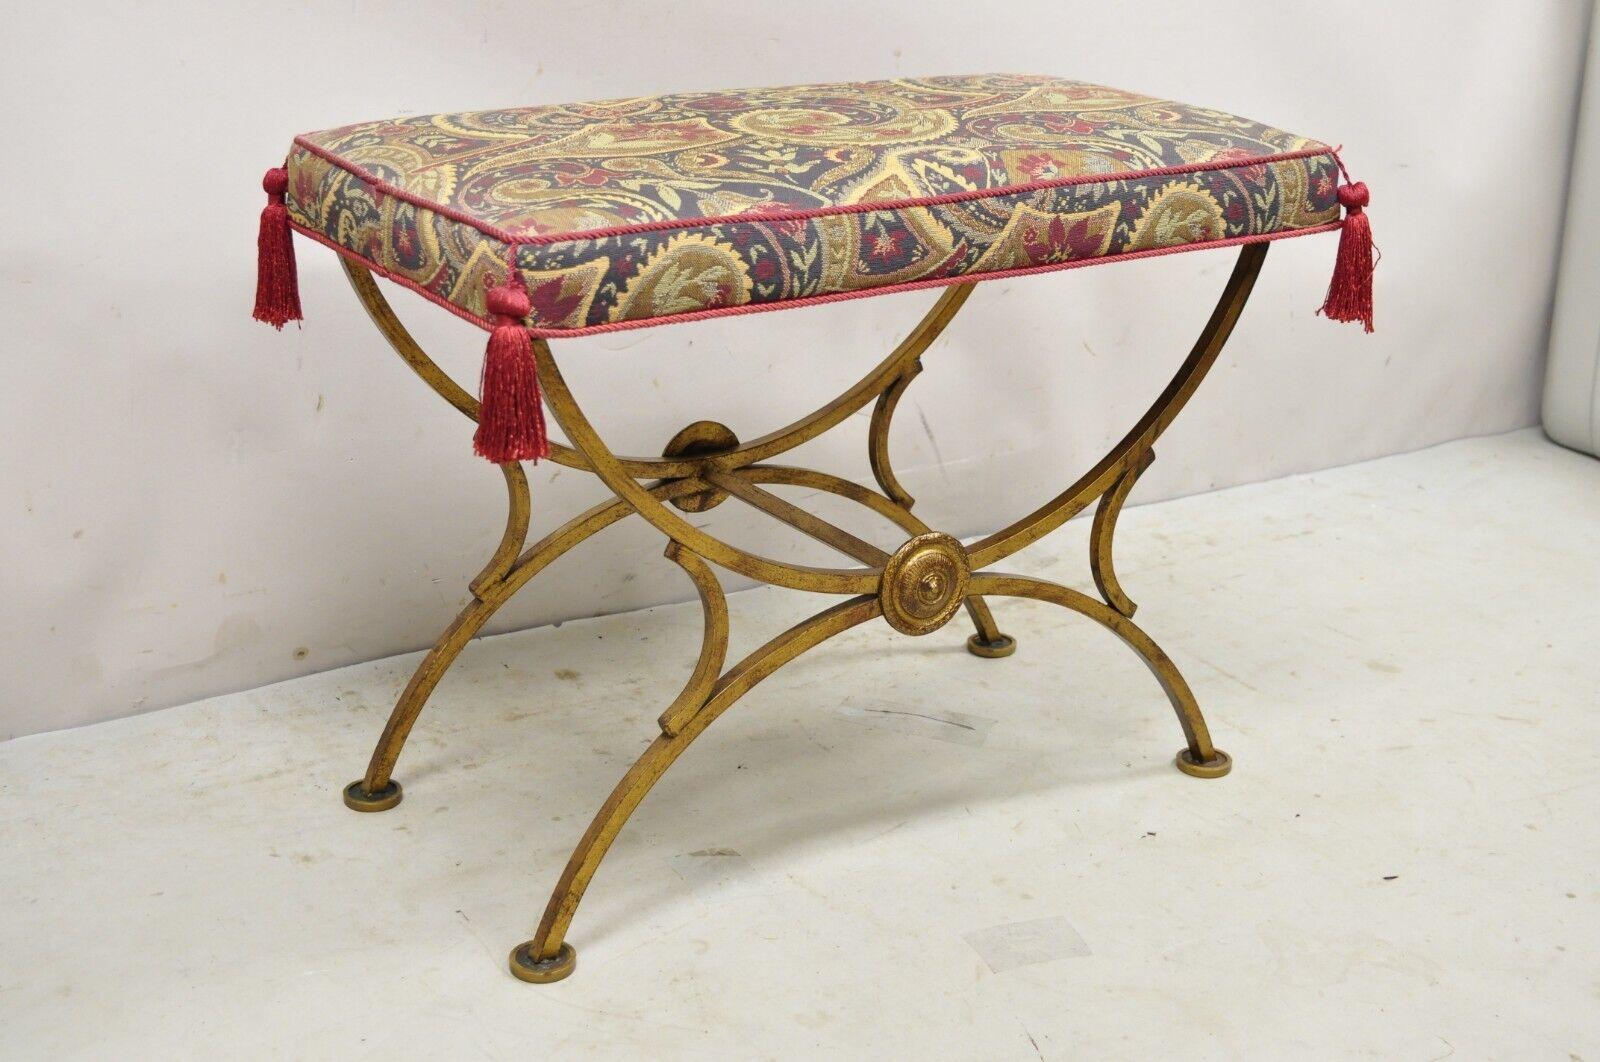 Vintage Italian Hollywood Regency gold gilt iron curule x-form vanity bench seat stool. Item features an X-frame, gold finish, upholstered seat with tassels, wrought iron construction, very nice vintage item, great style and form. Circa Mid 20th